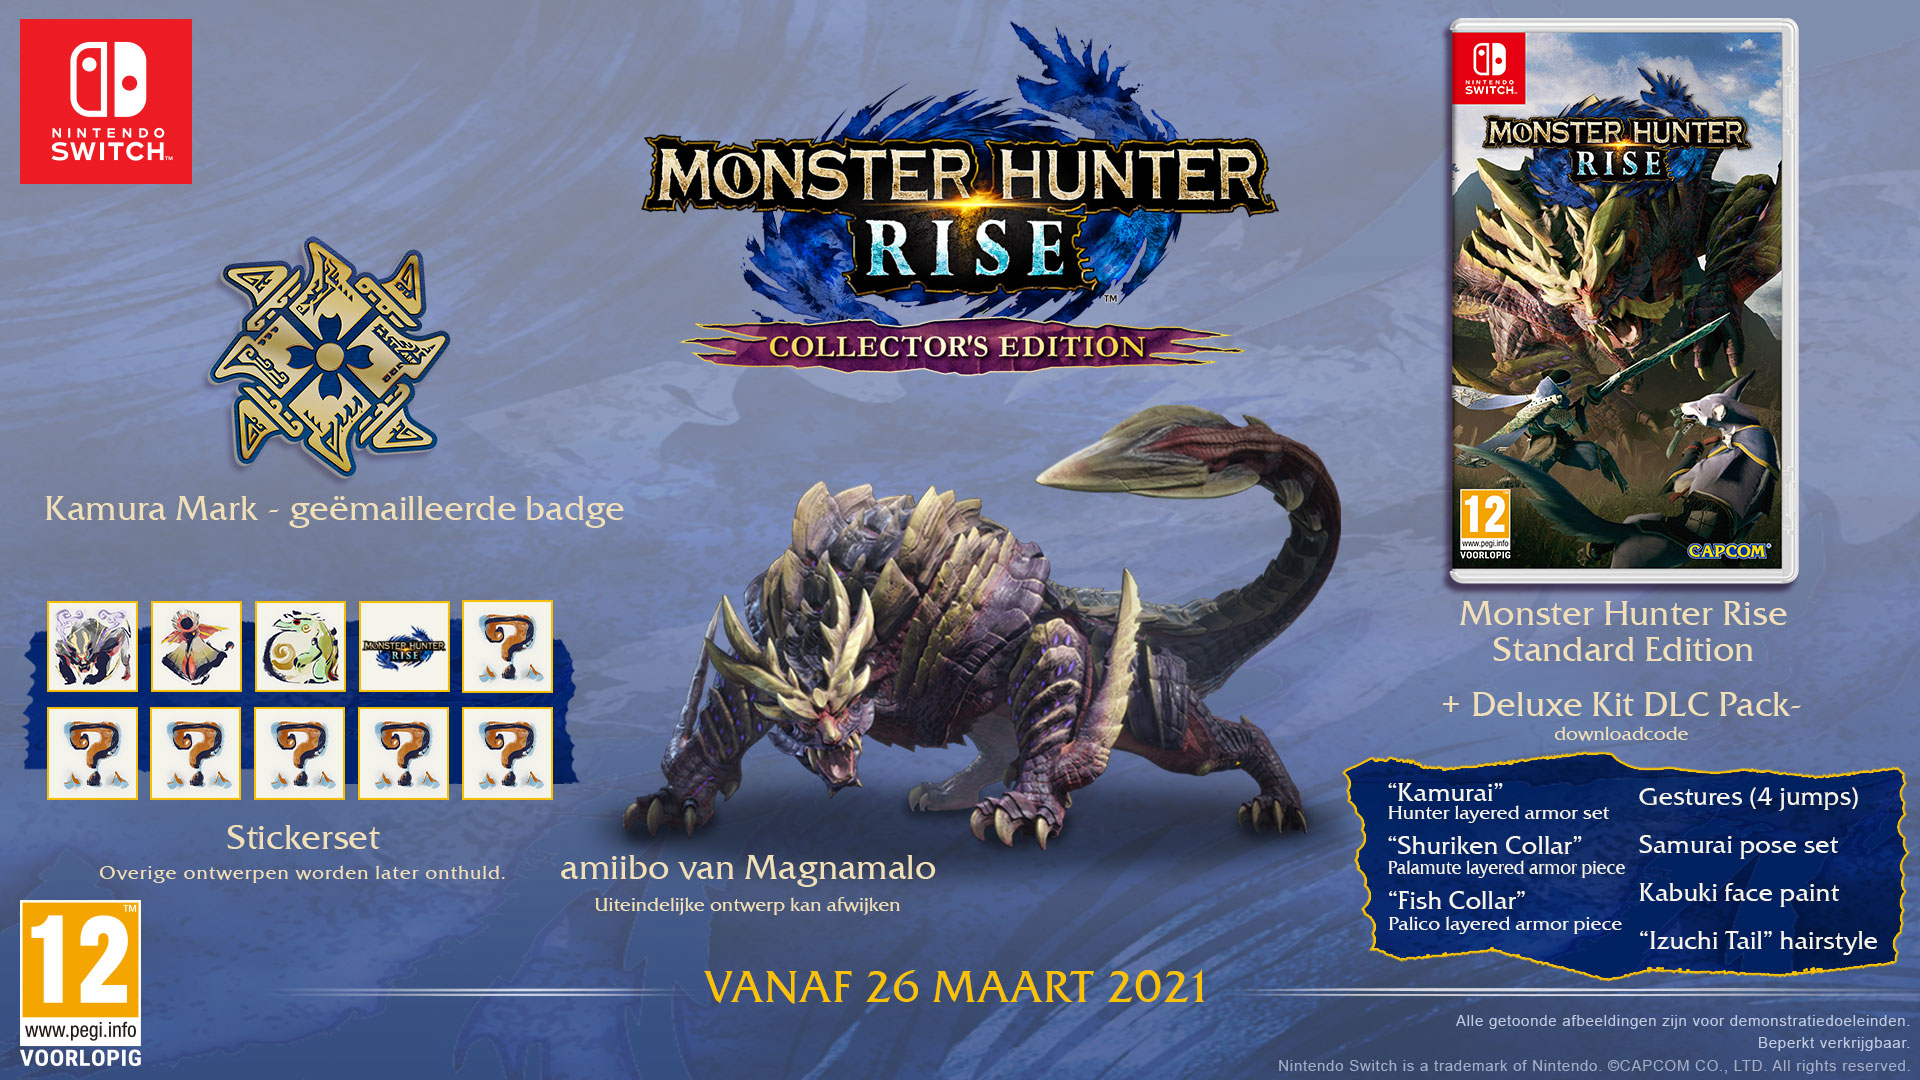 Monster Hunter: Rise - Collector's Edition